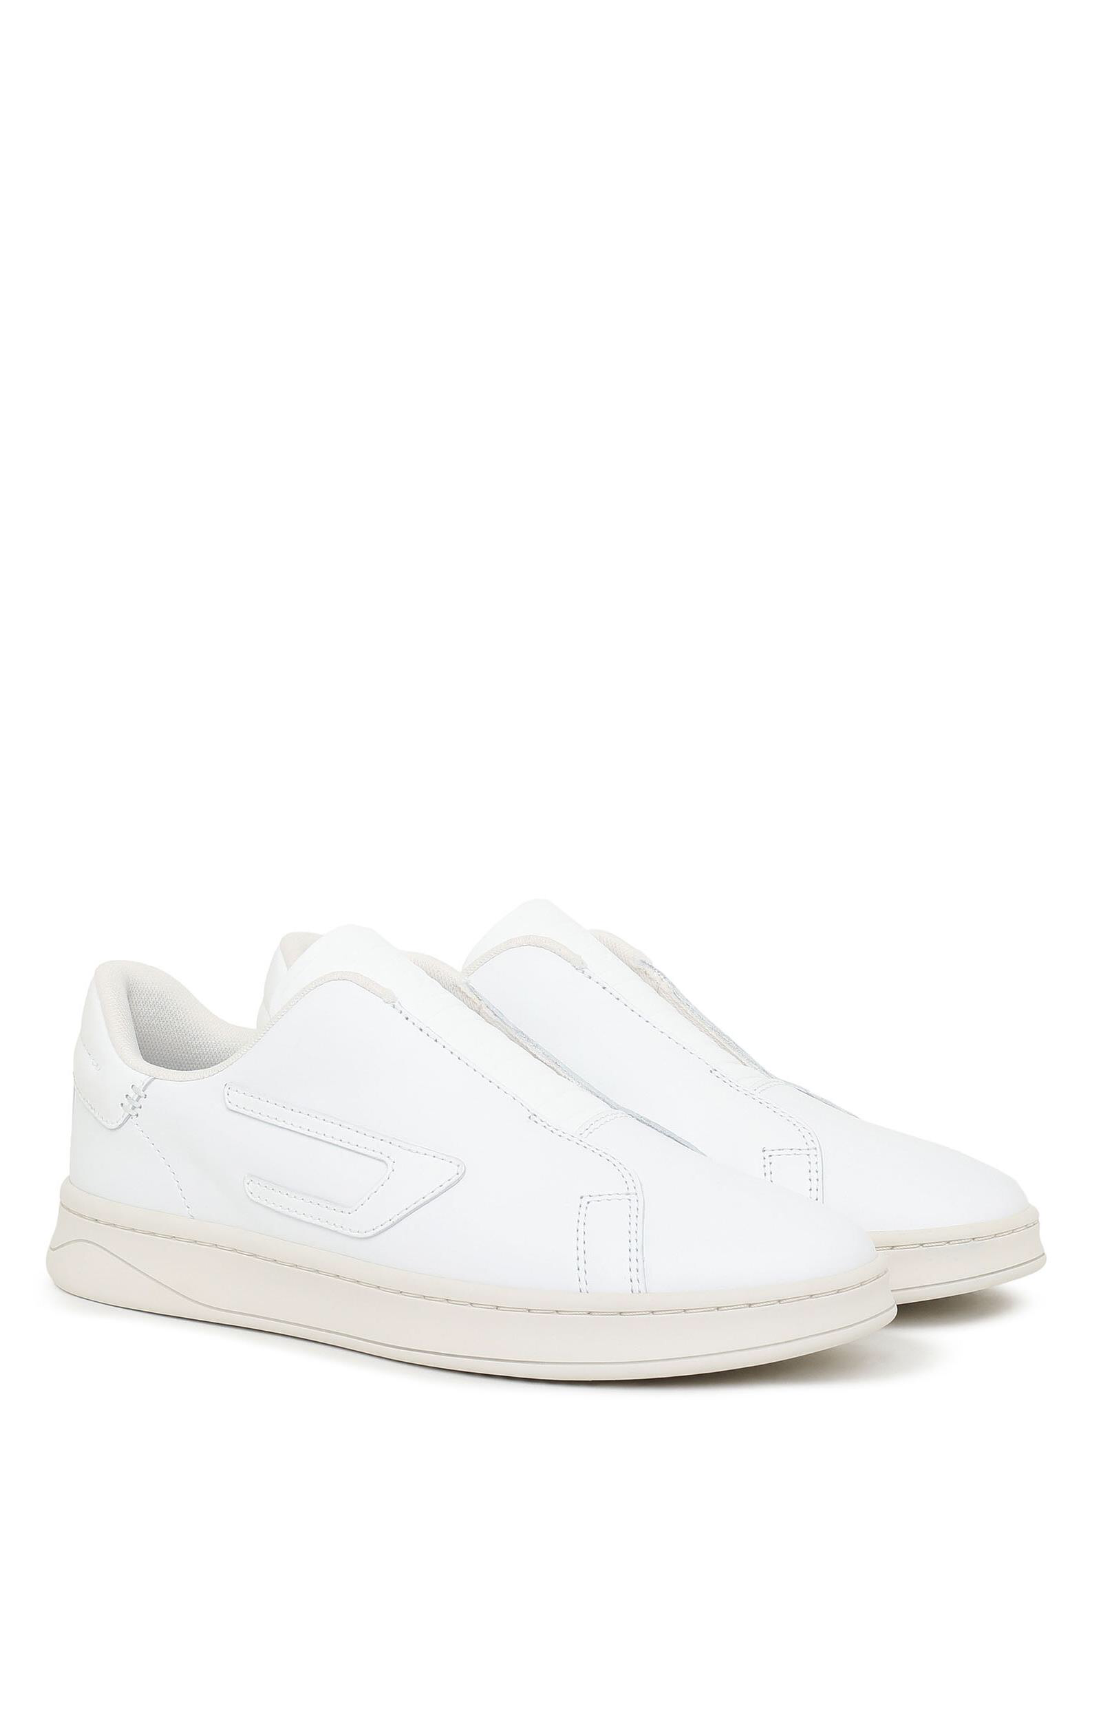 Diesel S-Athene Slip On W White - Issimo Shoes